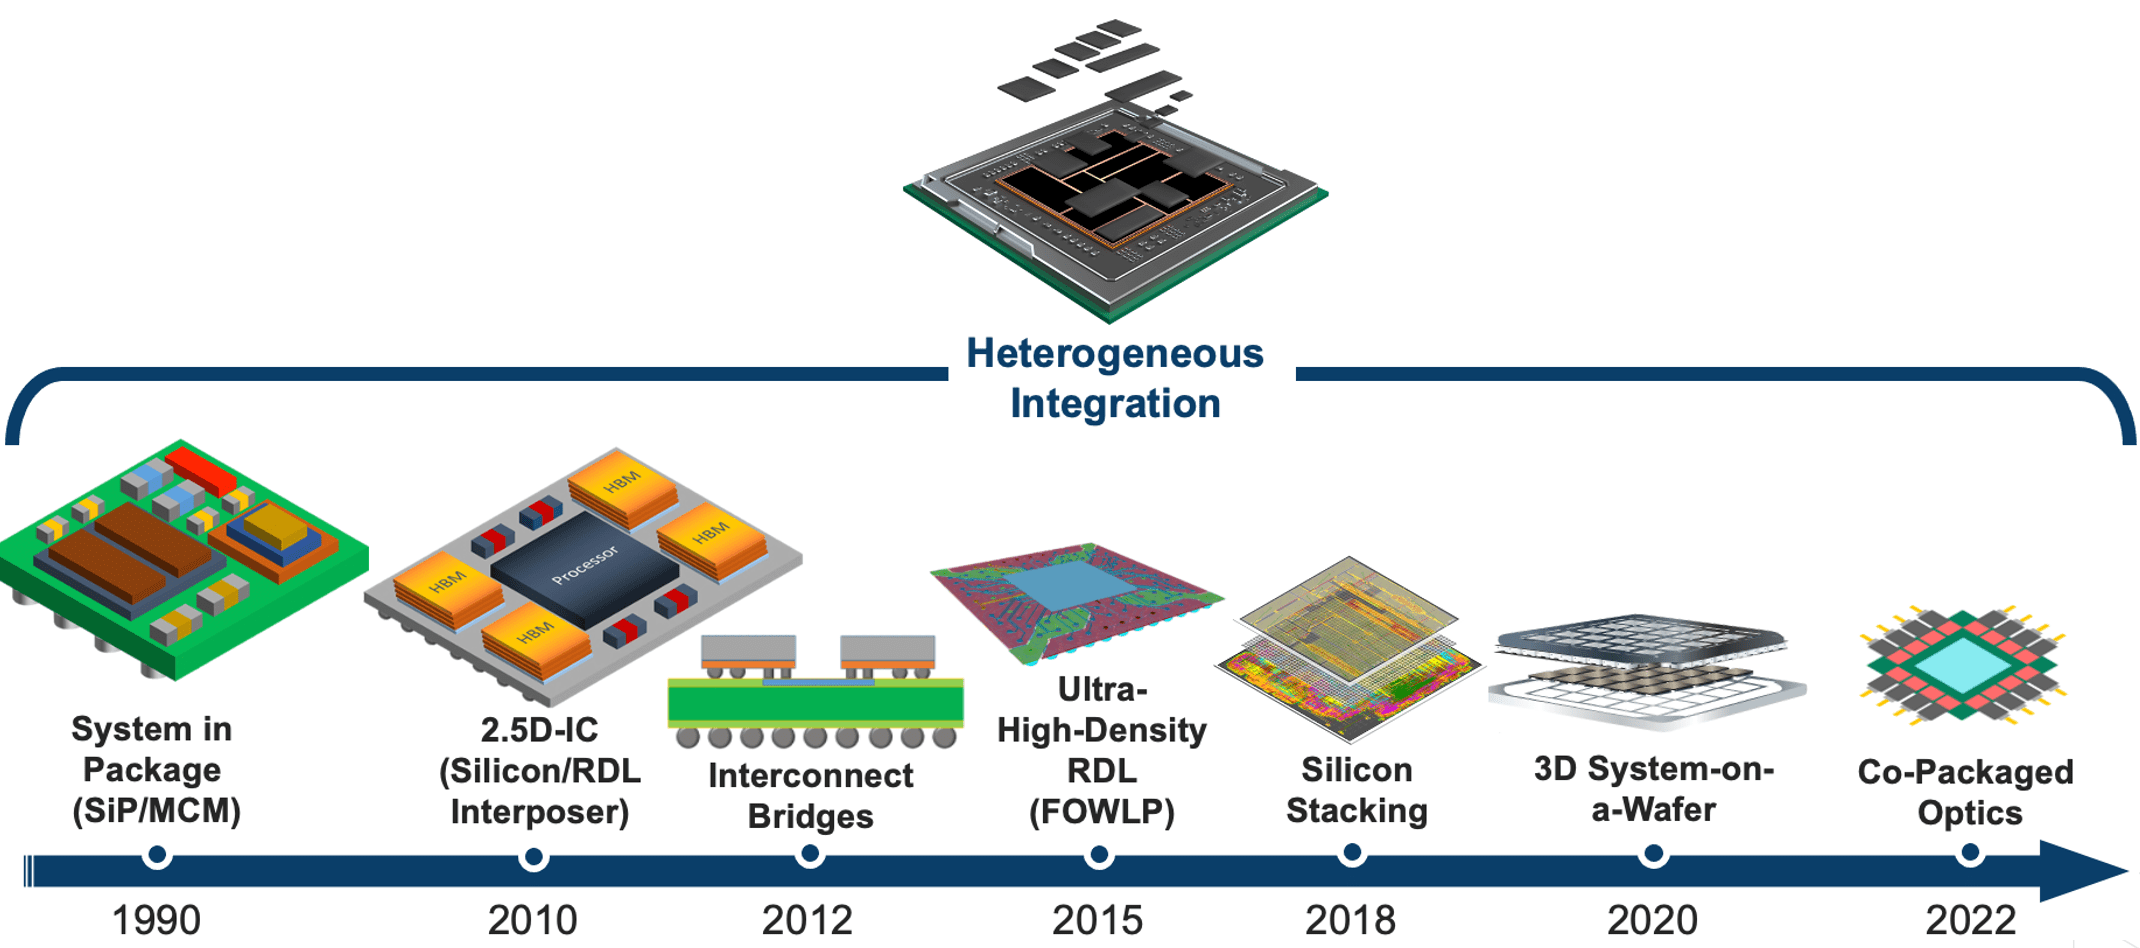 Mechanical Challenges Rise With Heterogeneous Integration